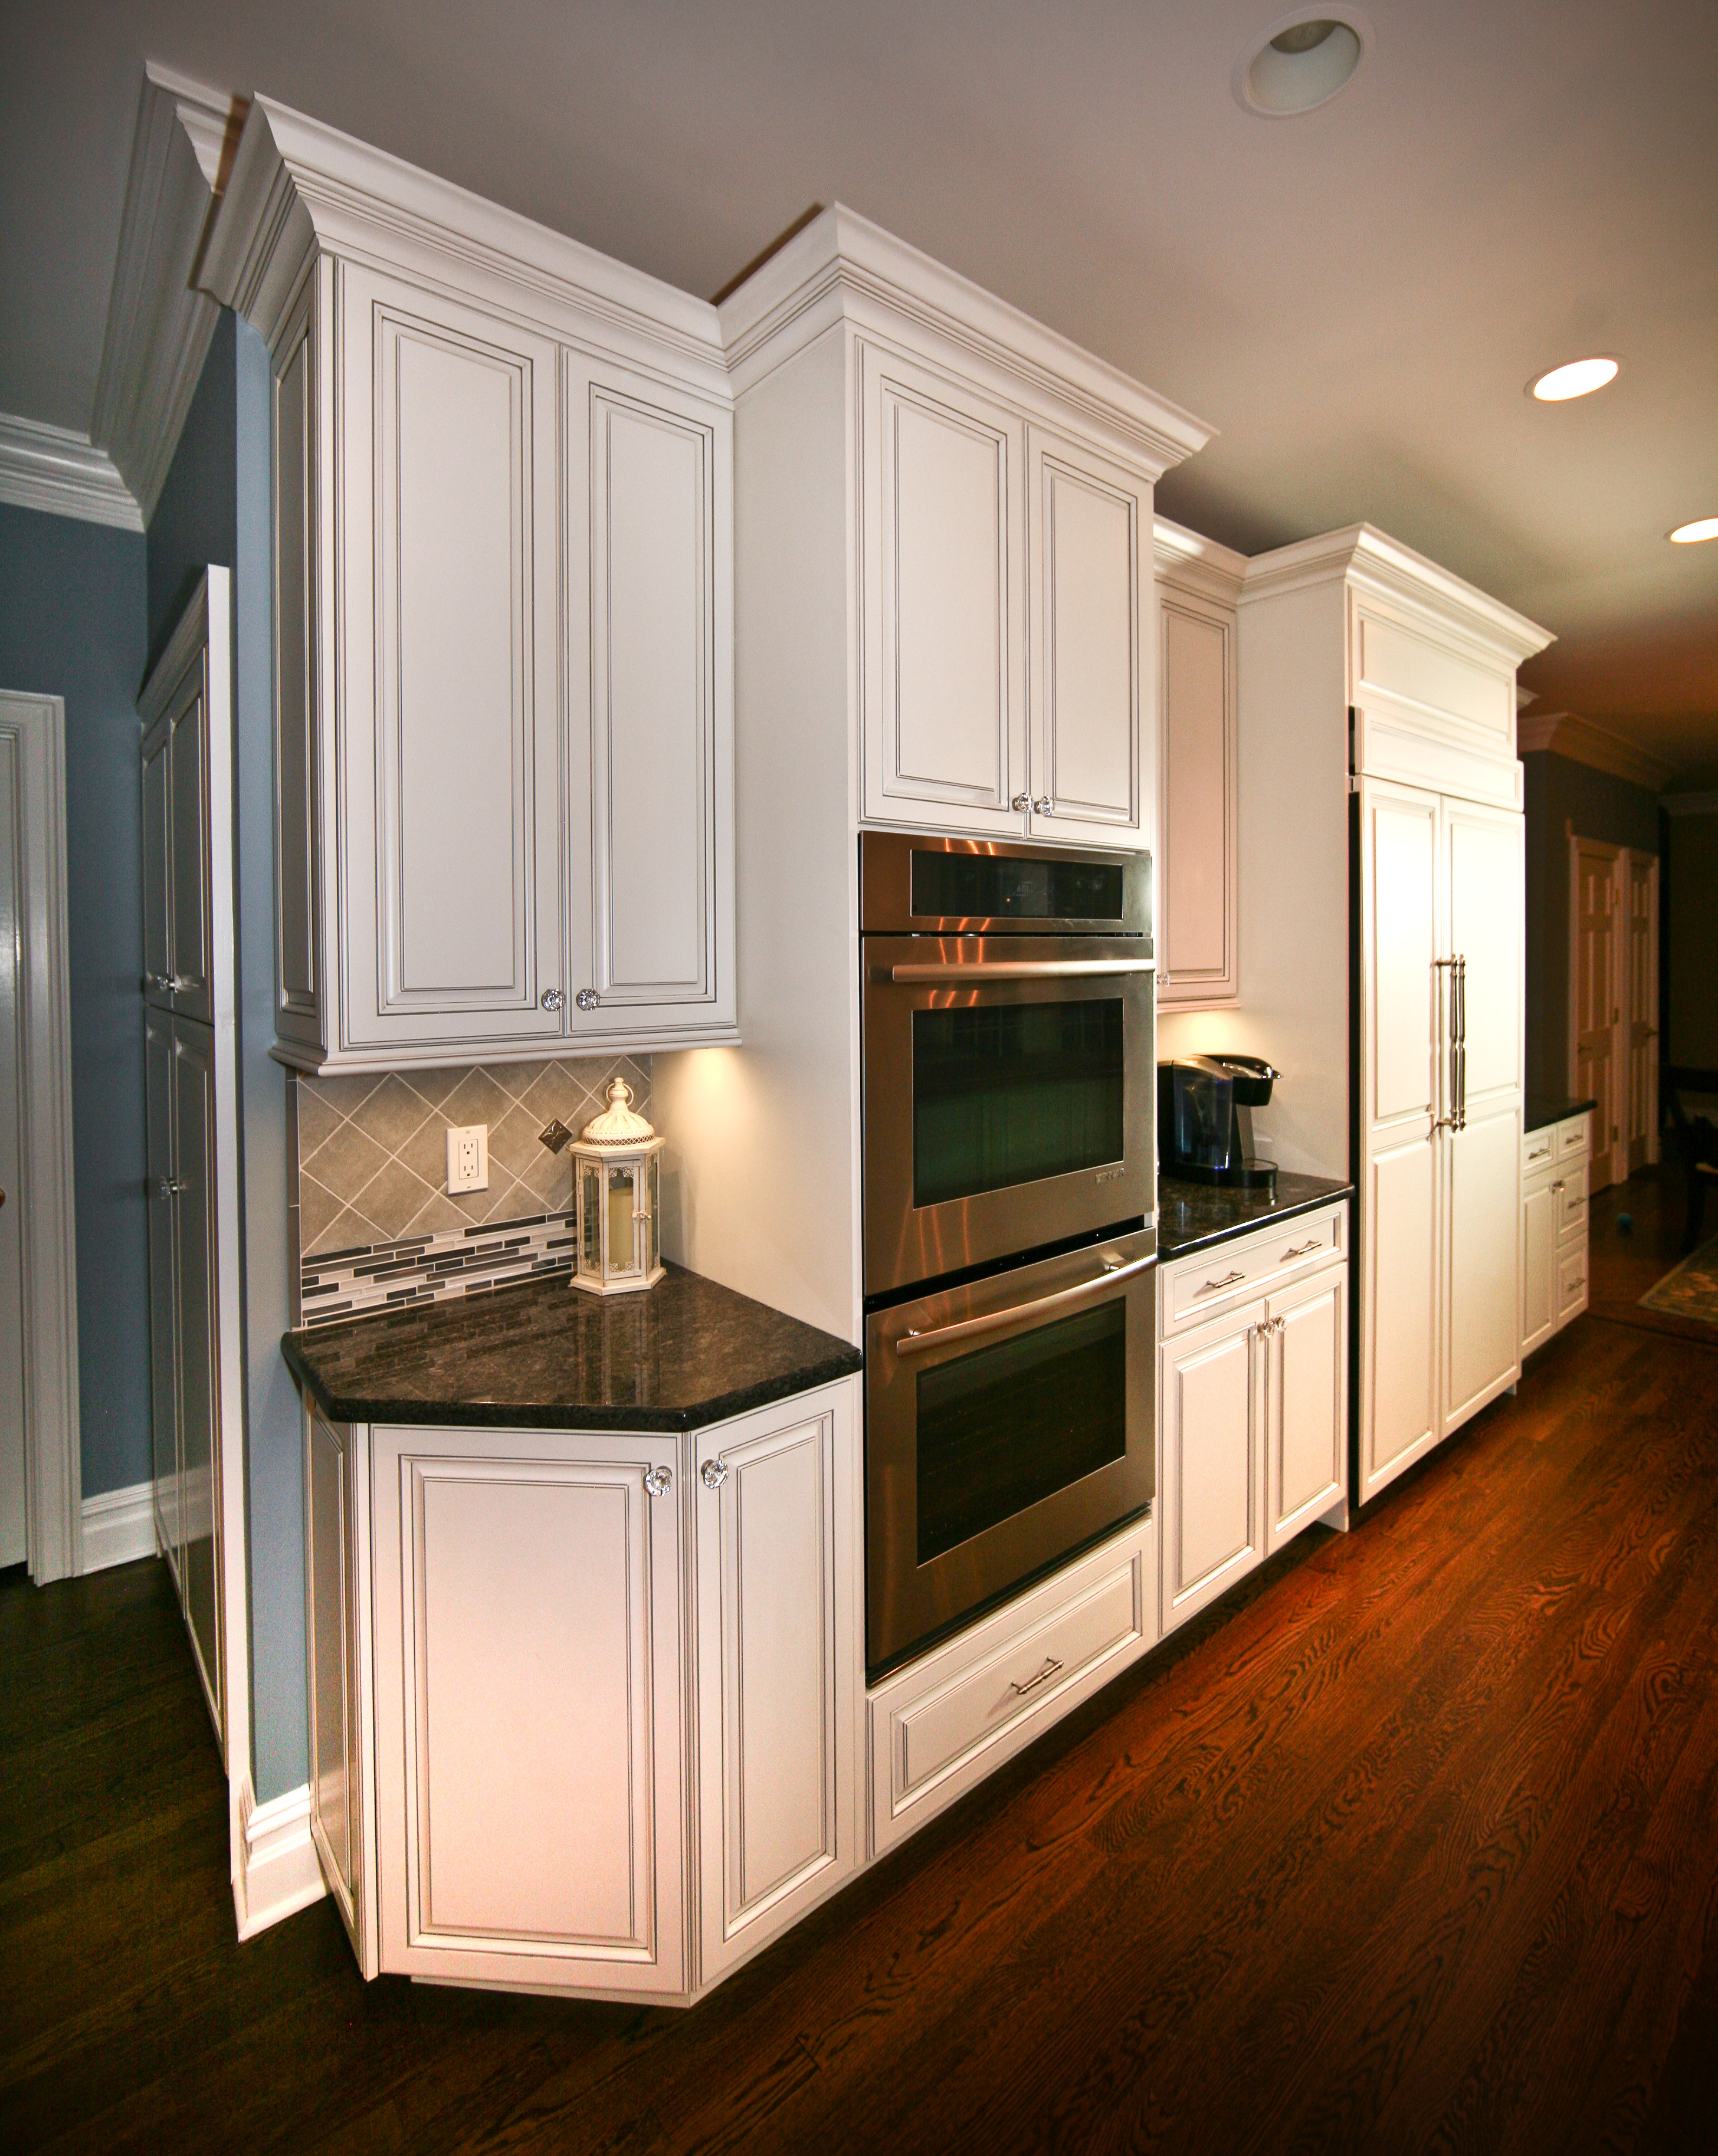 Classic Custom Cabinets Rumson New Jersey By Design Line Kitchens,How To Organize Bookshelf